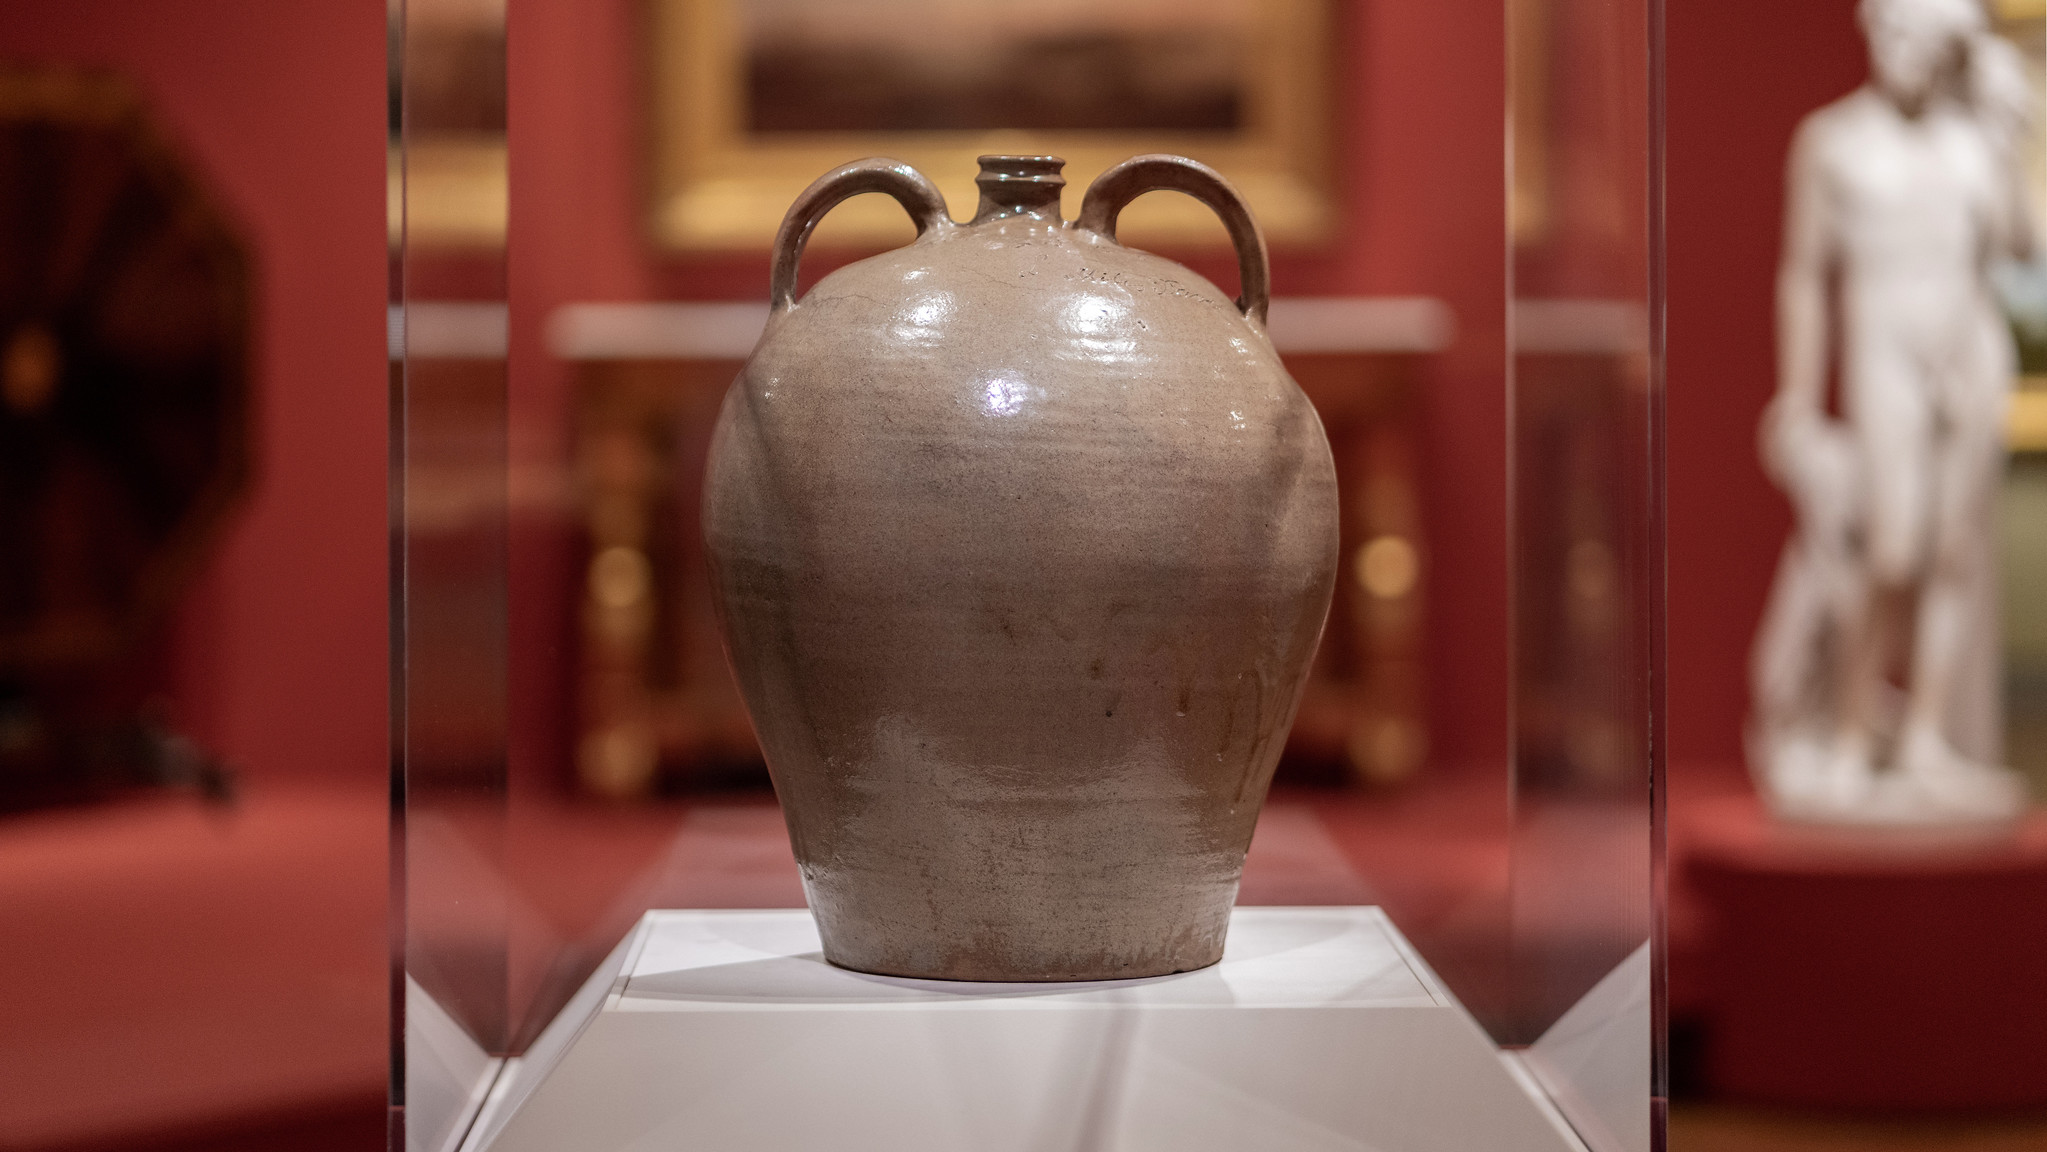 David Drake, Doubled-handled Jug (Lewis J. Miles Factory, Horse Creek Valley, Edgefield District, South Carolina), 1840, stoneware with alkaline glaze, 44.13 x 35.24 cm (Virginia Museum of Fine Arts; photo: Steven Zucker, CC BY-NC-SA 2.0)